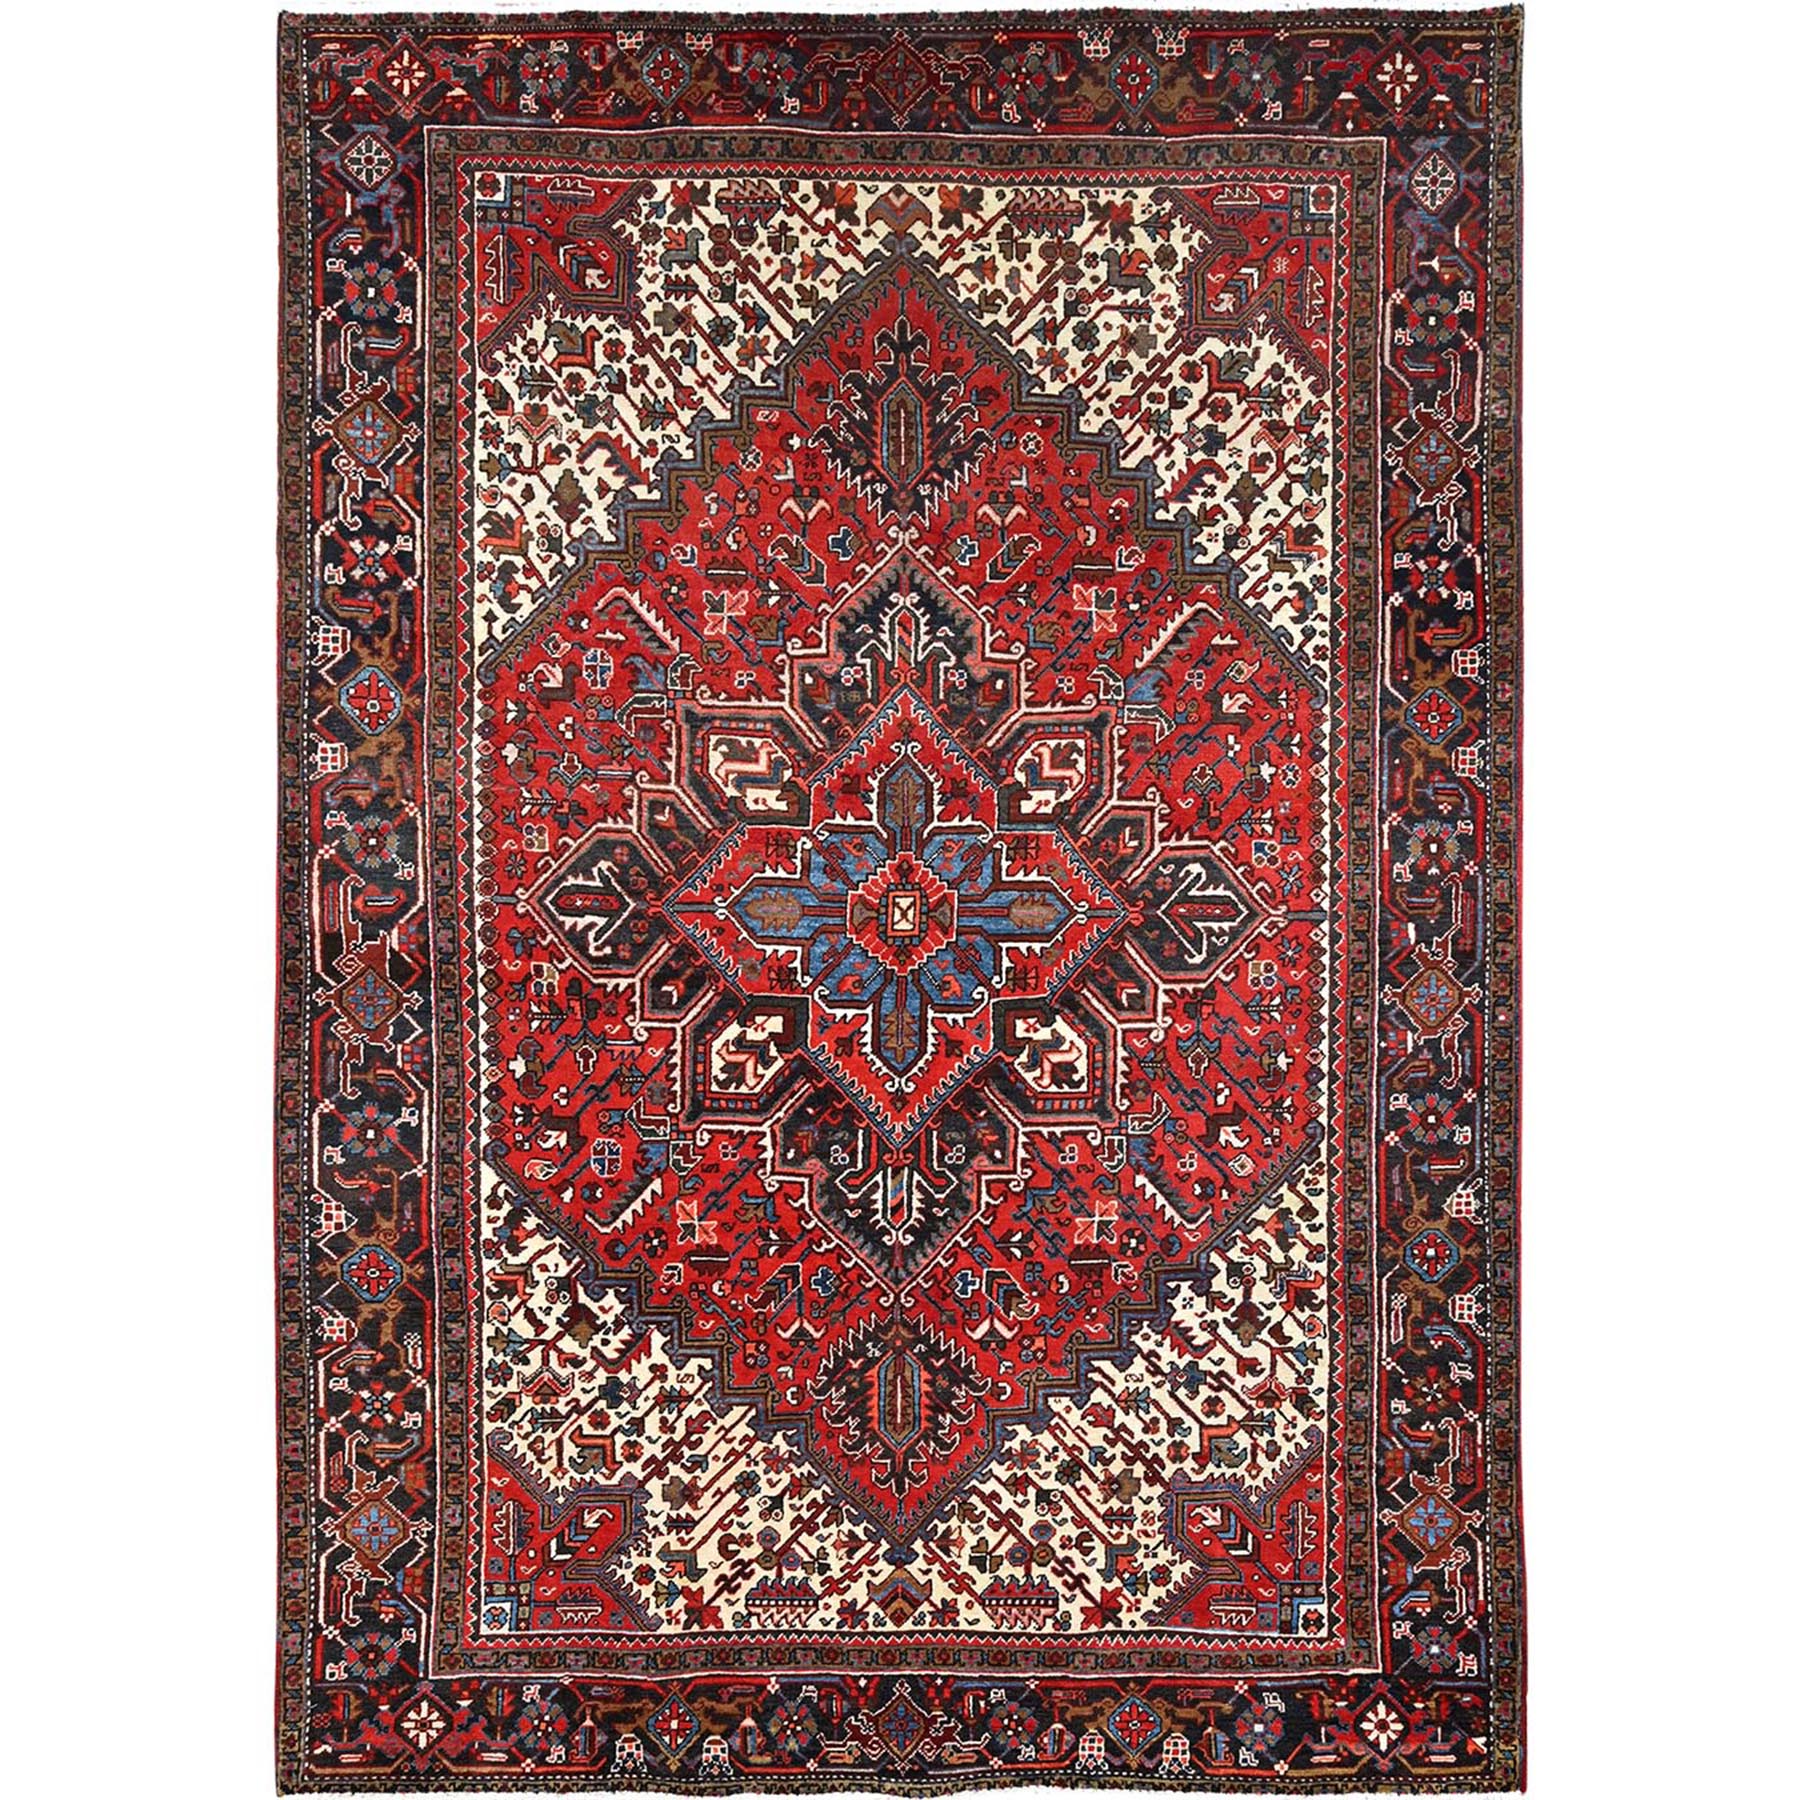 7'8"x11' Imperial Red, Semi Antique Persian Heriz, Good Condition, Distressed Look, Pure Wool, Hand Woven, Oriental Rug 